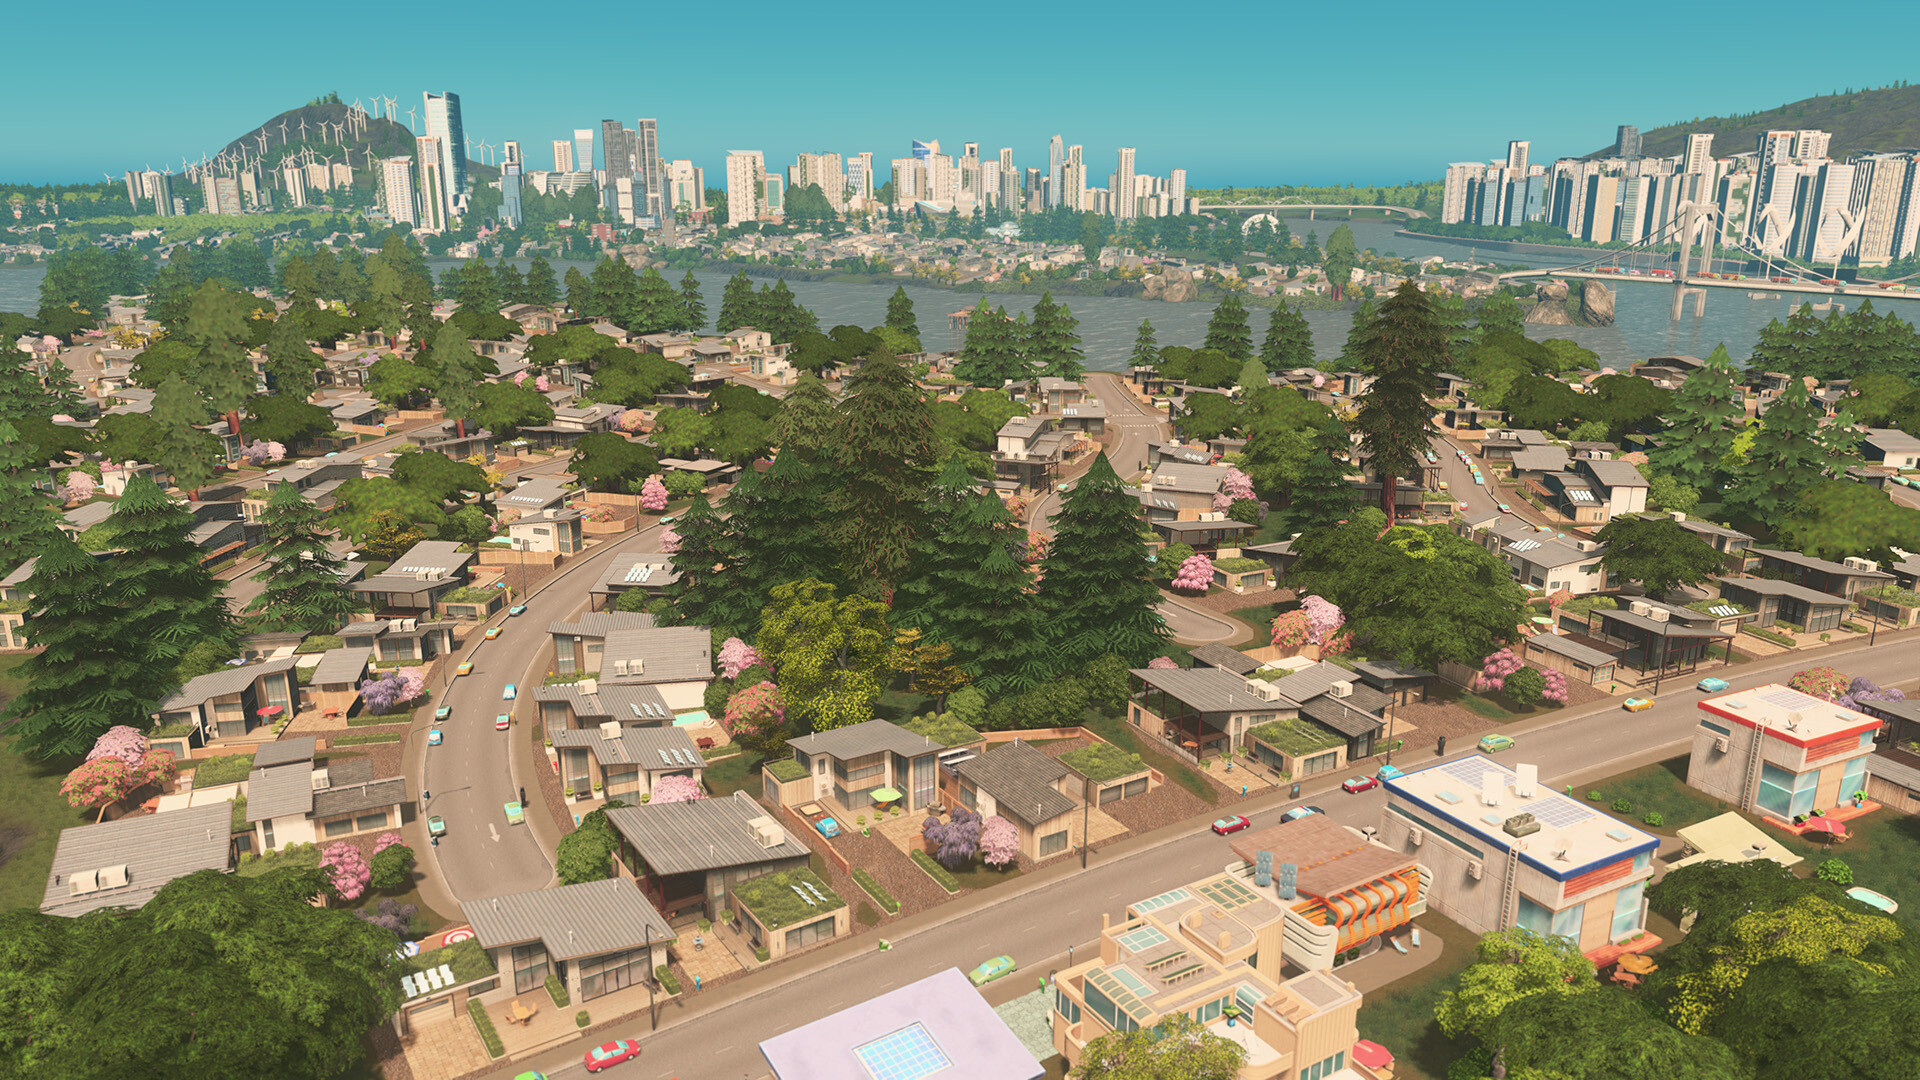 Find the best laptops for Cities: Skylines